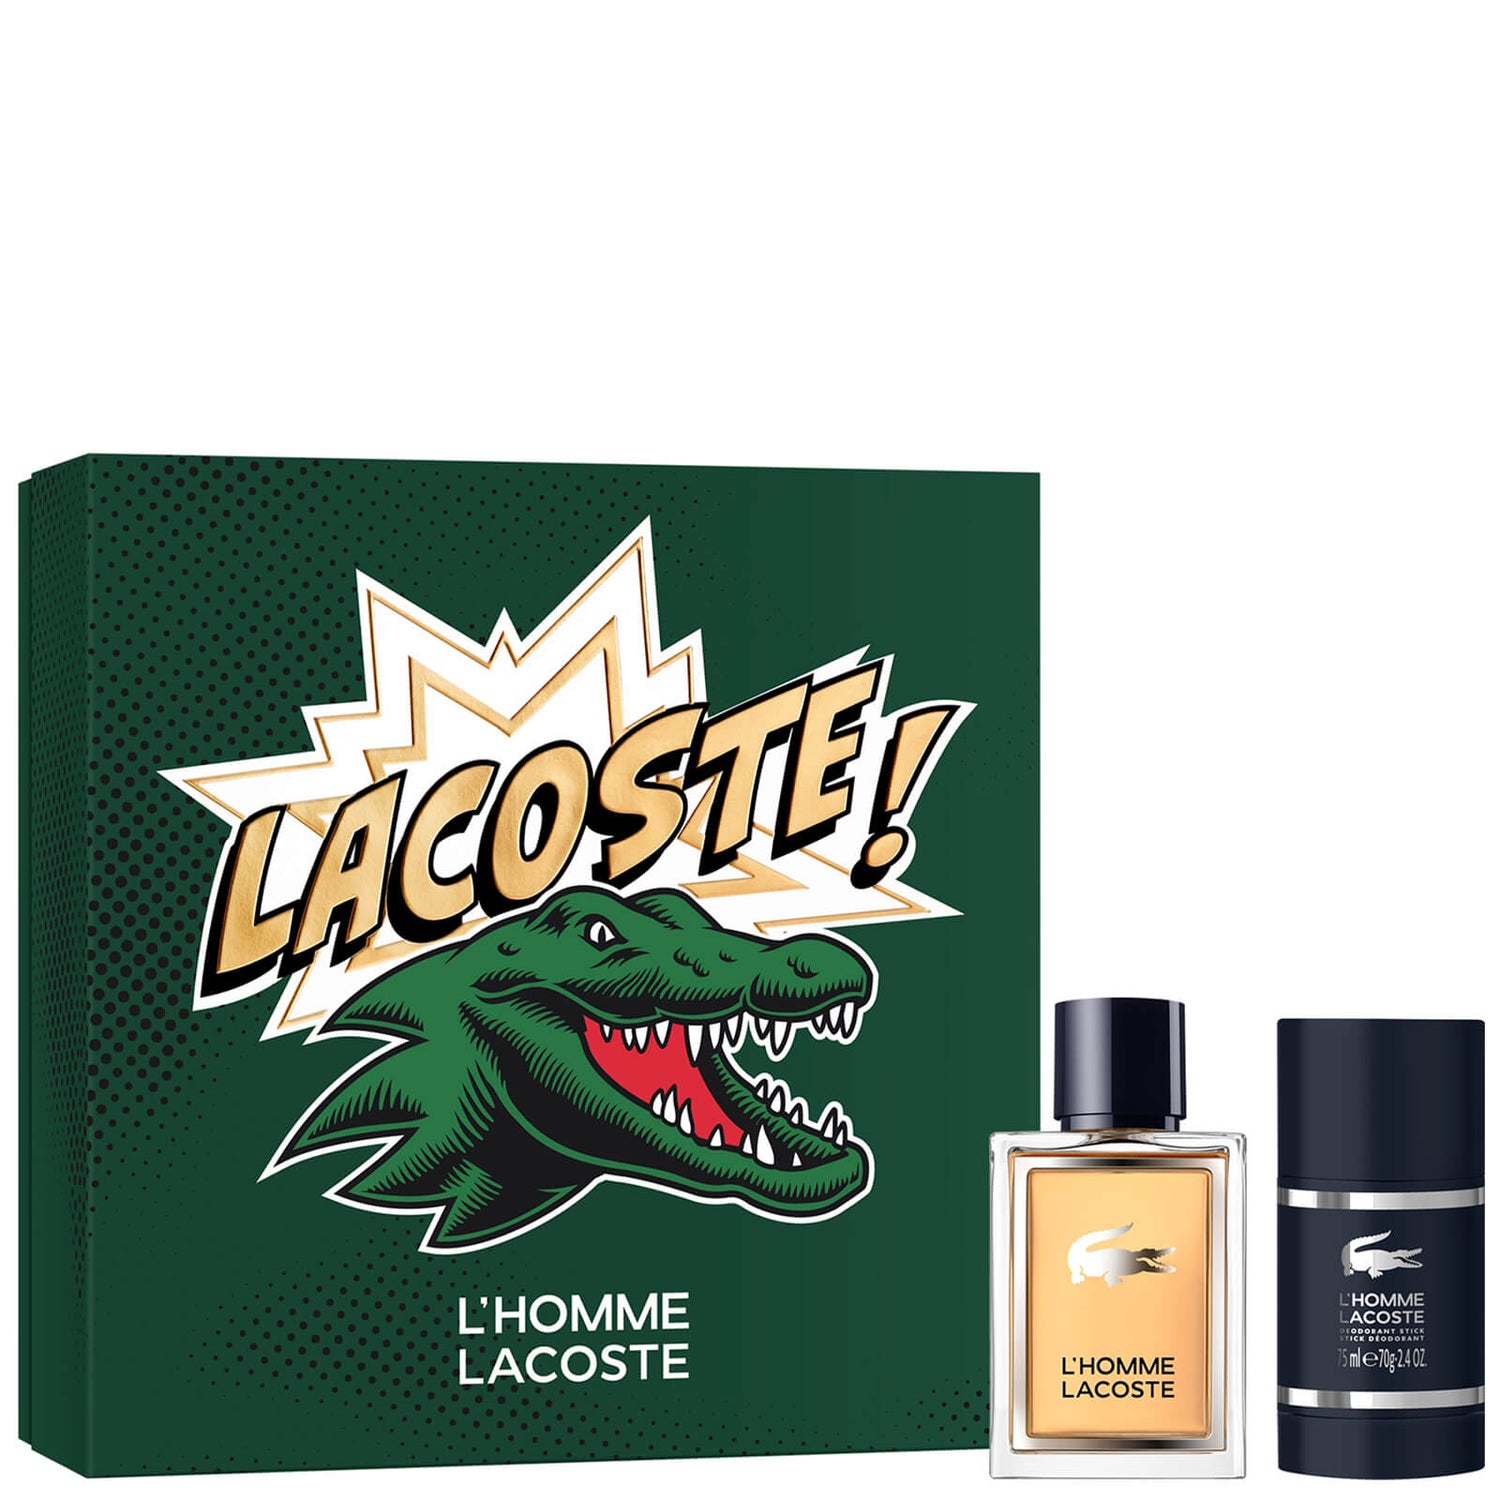 Lacoste L'Homme Christmas Gift Set - lookfantastic